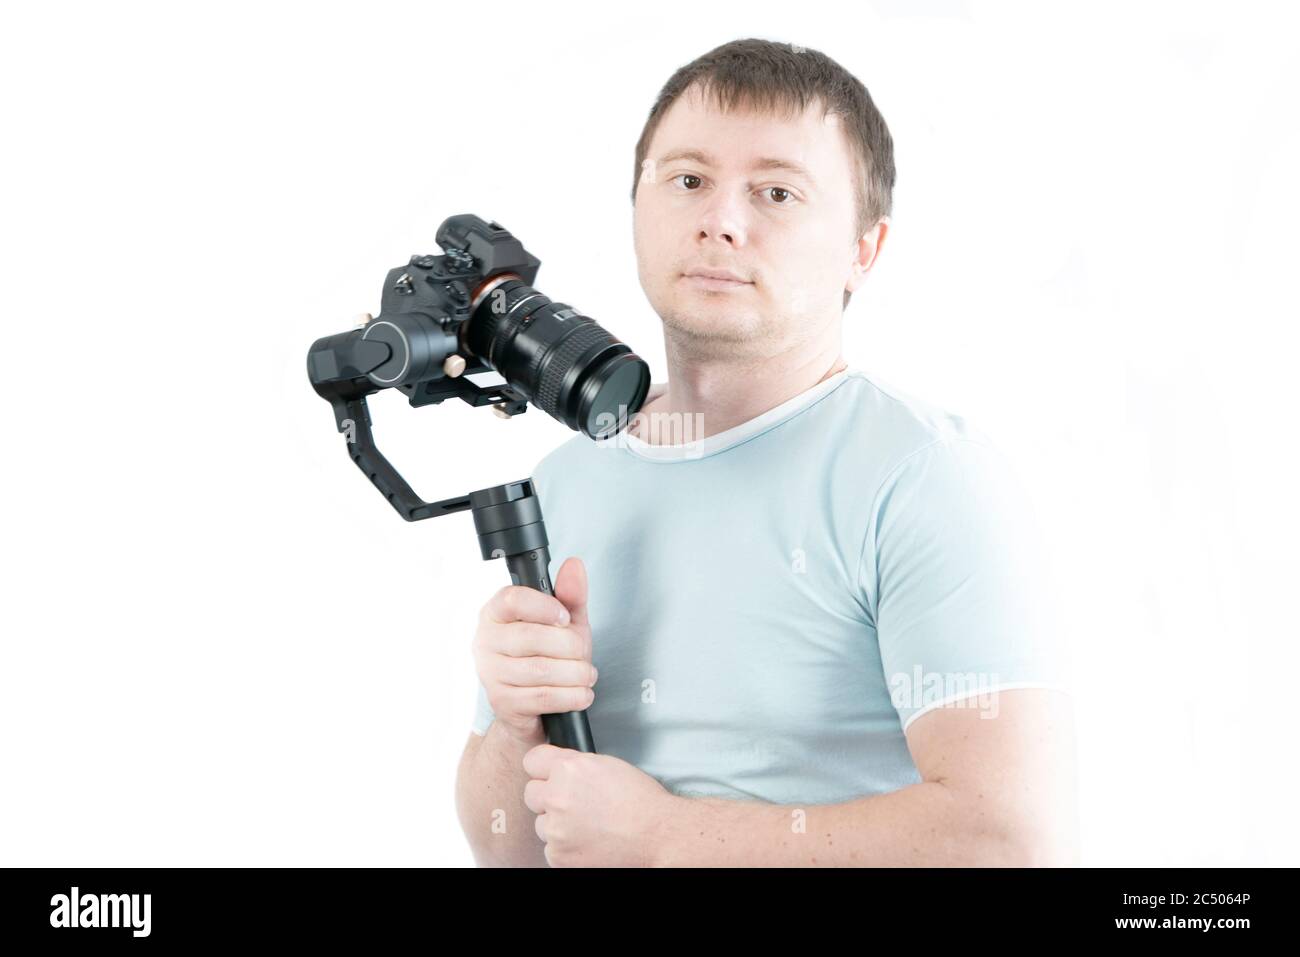 The guy holds a 3-axis stabilizer with a camera in his hand, takes a selfie video. Stock Photo